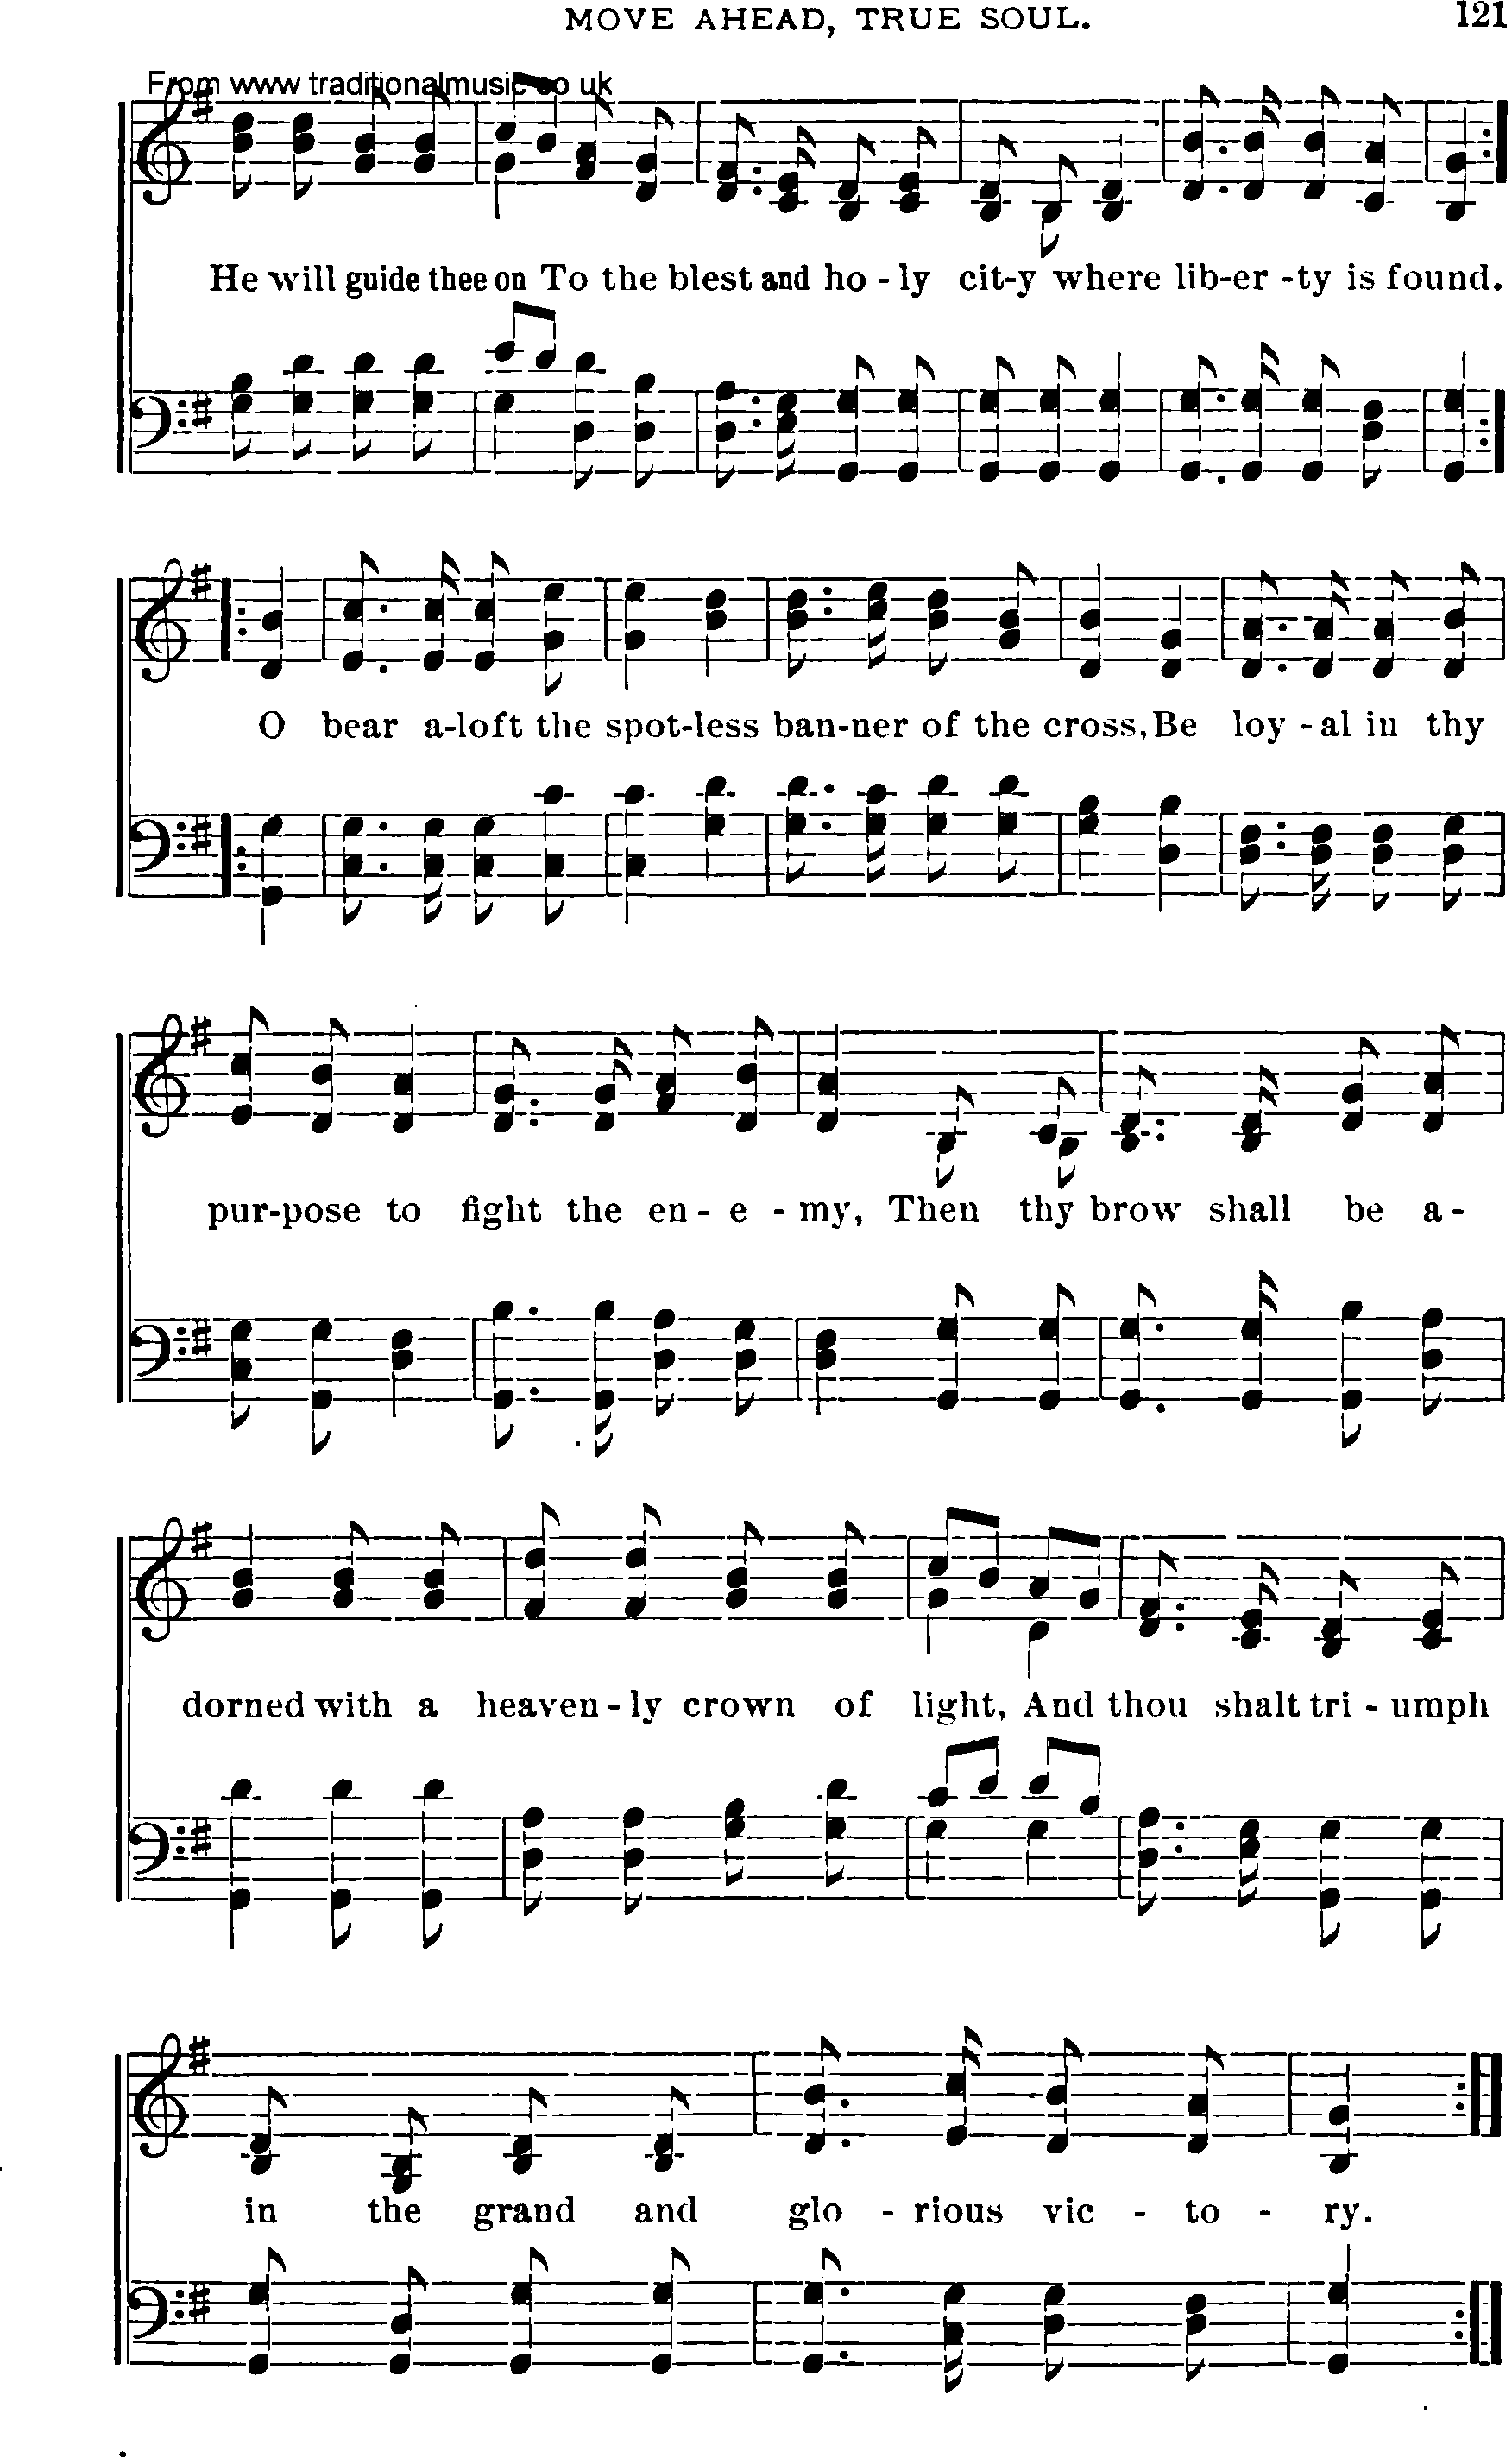 Shaker Music collection, Hymn: move ahead, true soul, sheetmusic and PDF